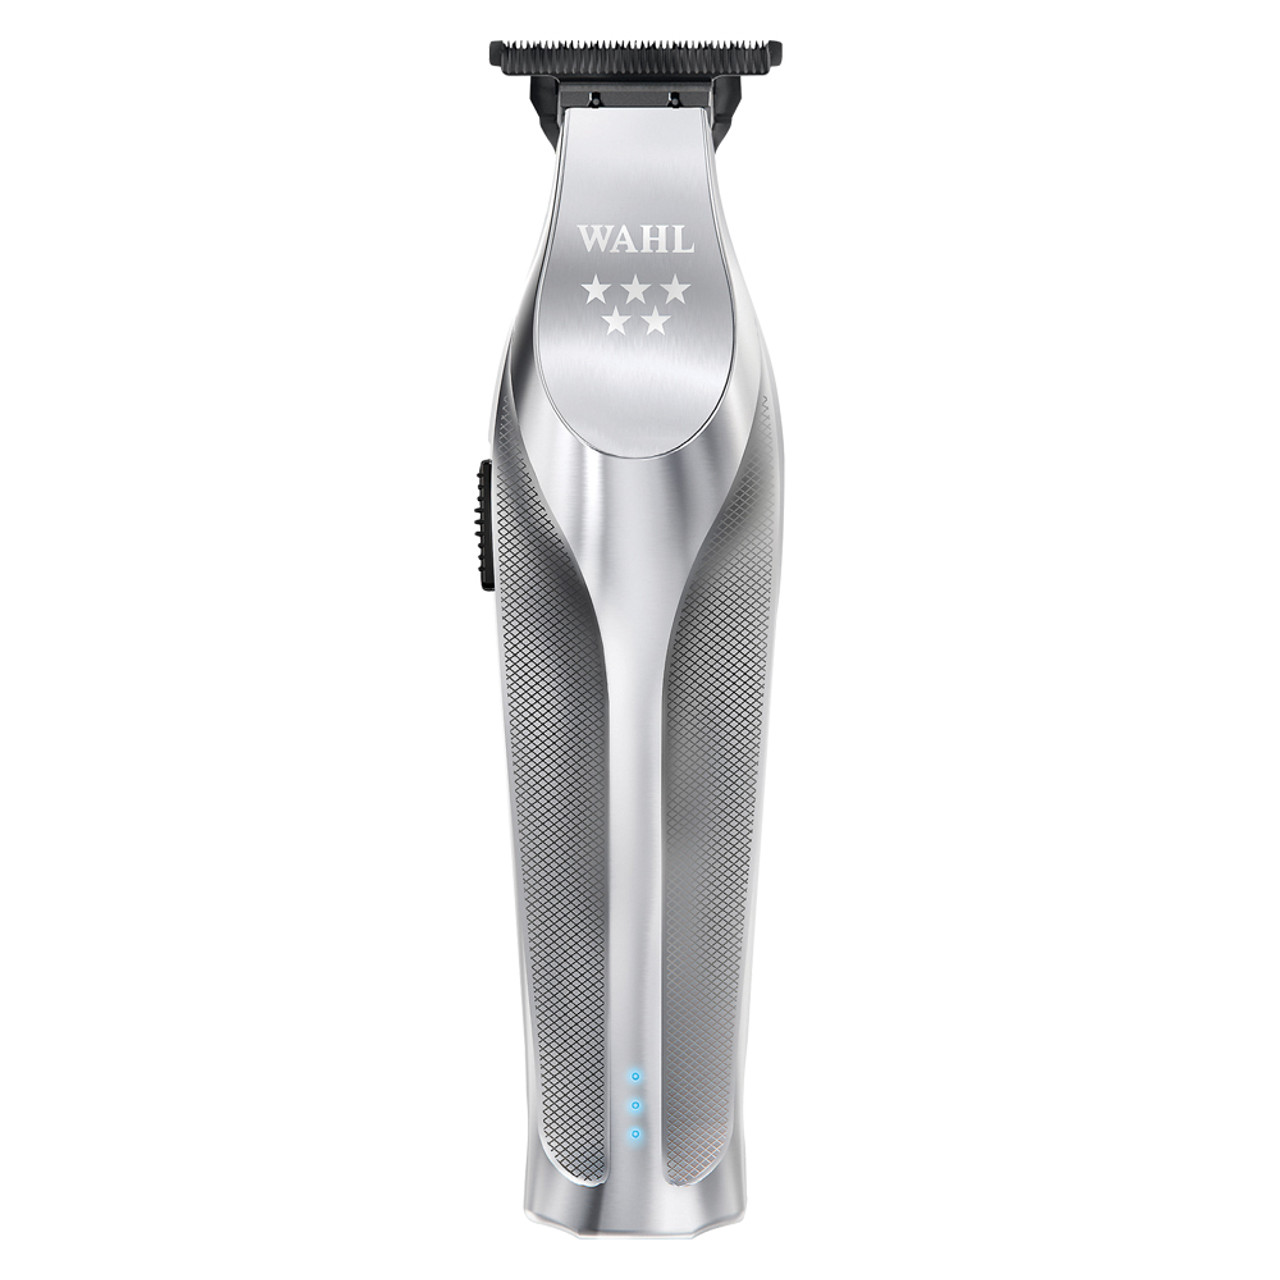 Wahl Super Close Shaver? Order At ! -  is nr. 1  in professional clippers, trimmers and accessories.